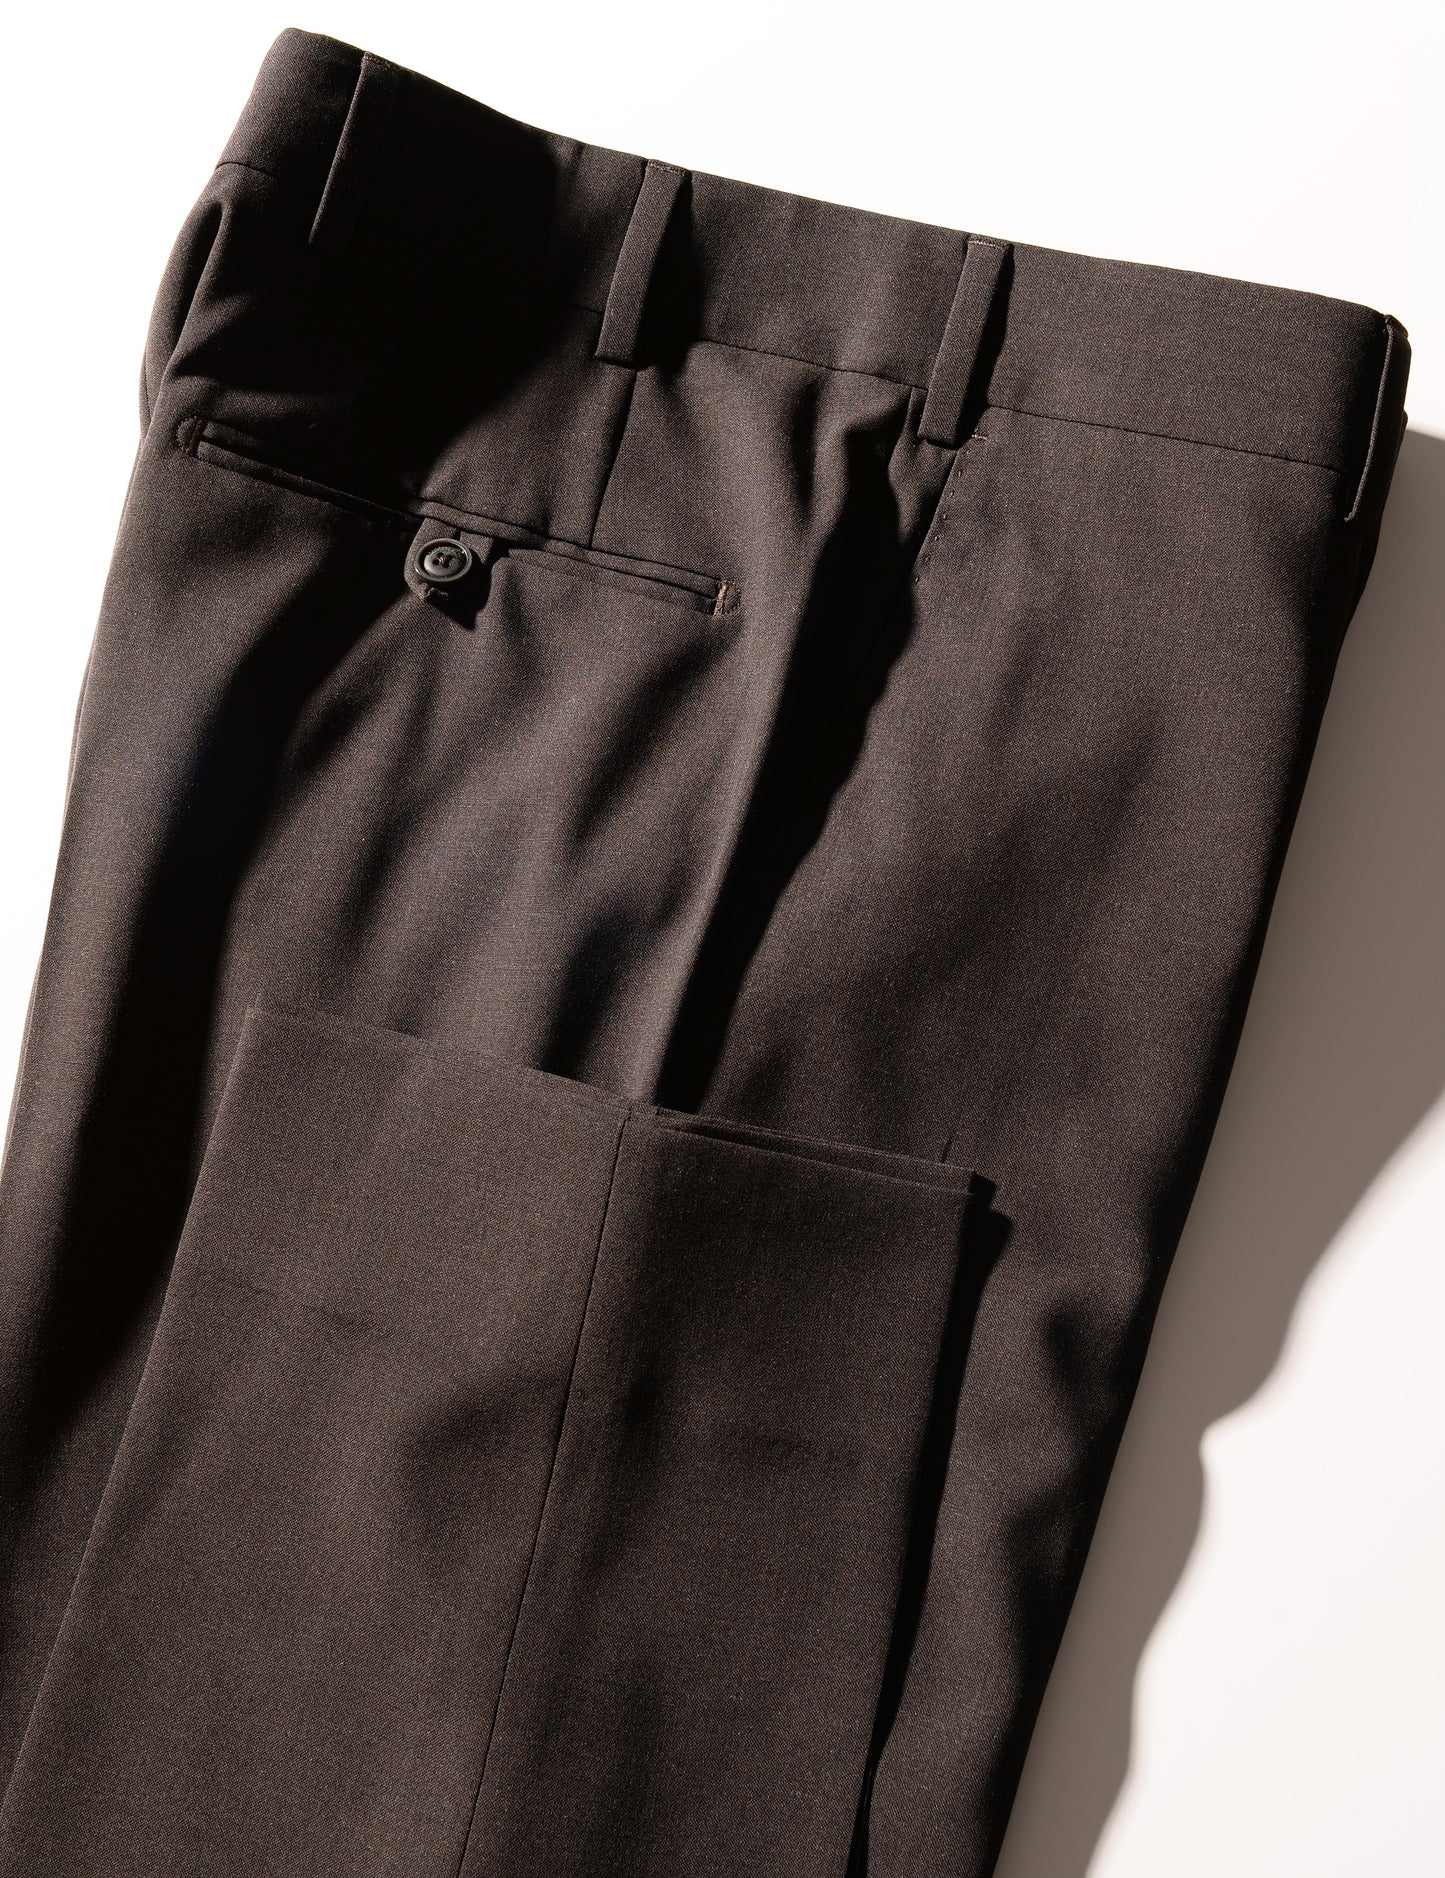 BKT50 Tailored Trousers in Heathered Plainweave - Charred Ember